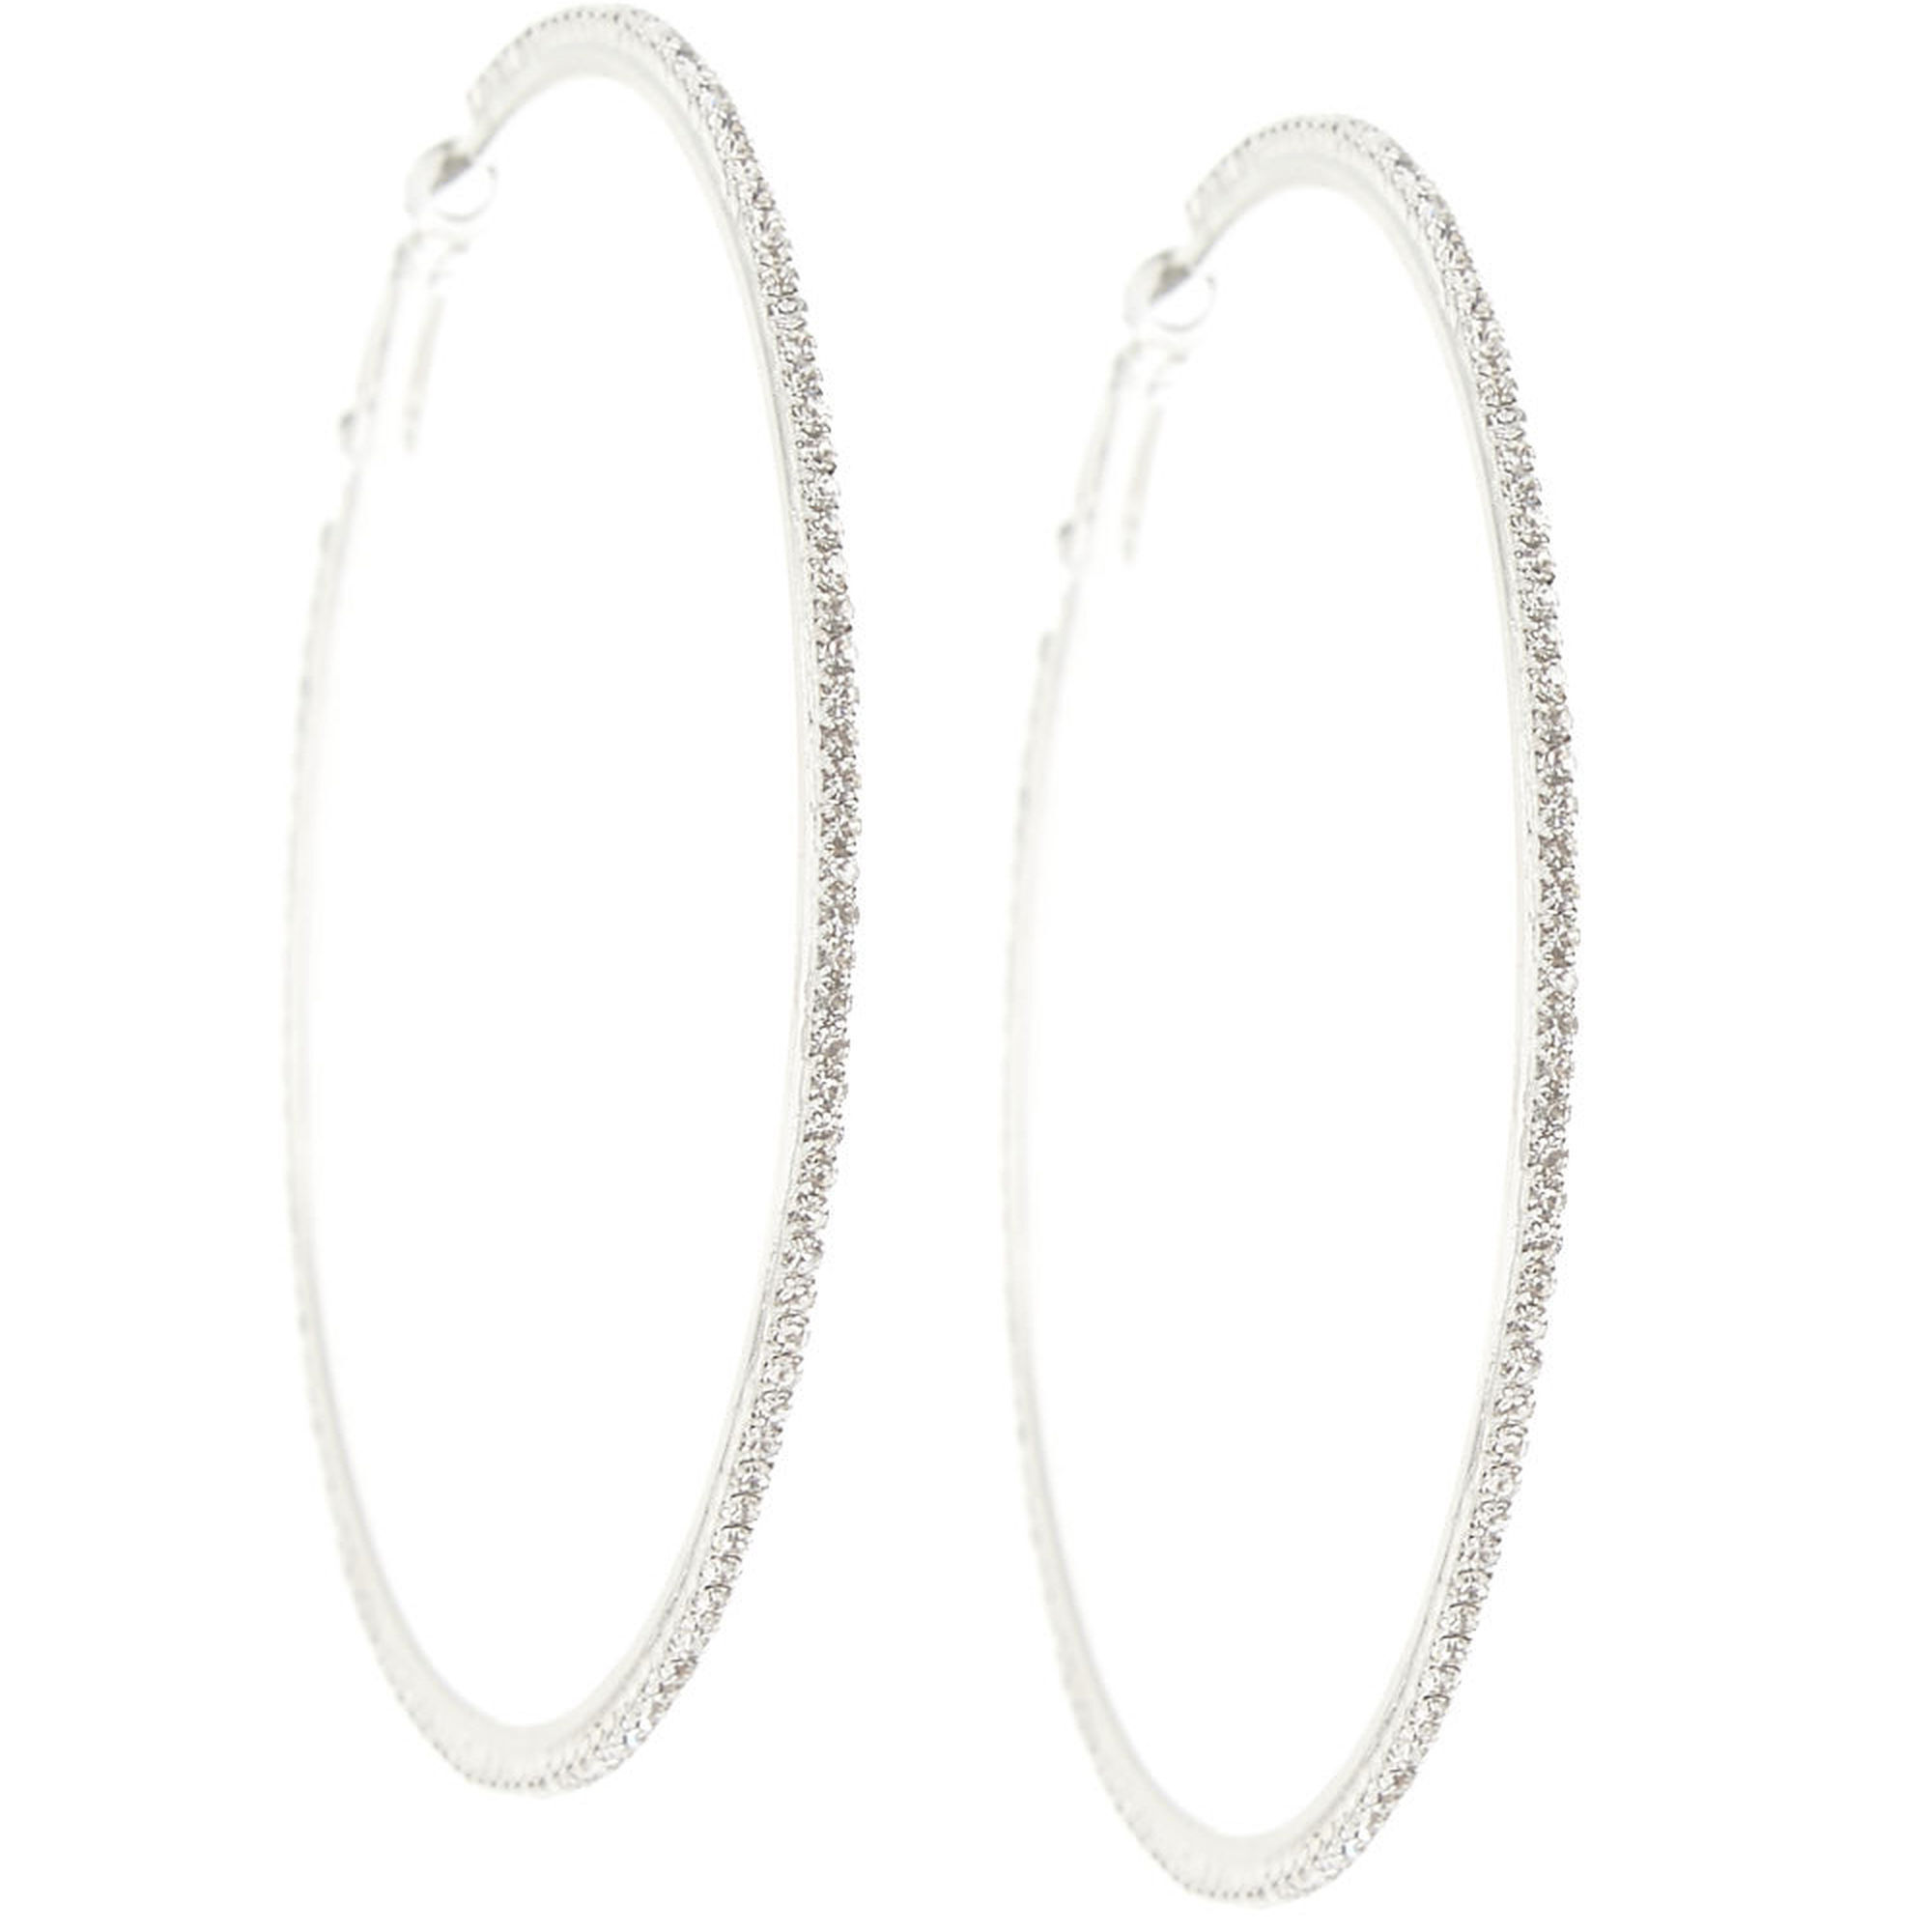 View Claires Glass Rhinestone 70MM Hoop Earrings Silver information